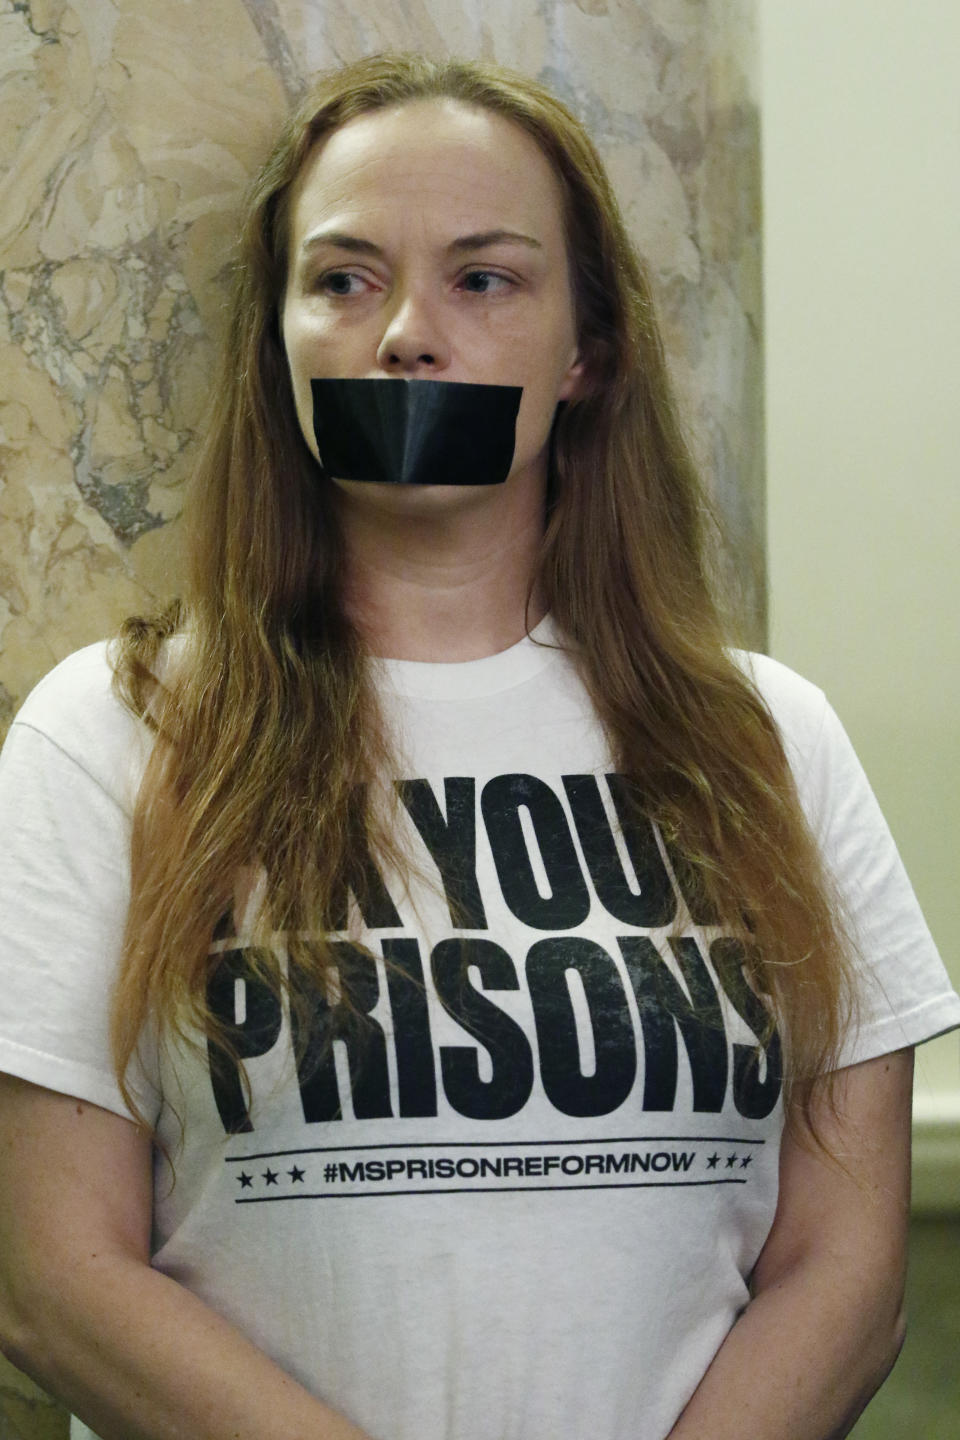 Danielle Quiterio, one of a couple of dozen prison reform advocates, who wore a strip of tape across their mouth as a form of silent protest, stands during a joint hearing of the House Corrections and Judiciary B Committees, Thursday, Feb. 13, 2020 at the Capitol in Jackson, Miss. (AP Photo/Rogelio V. Solis)